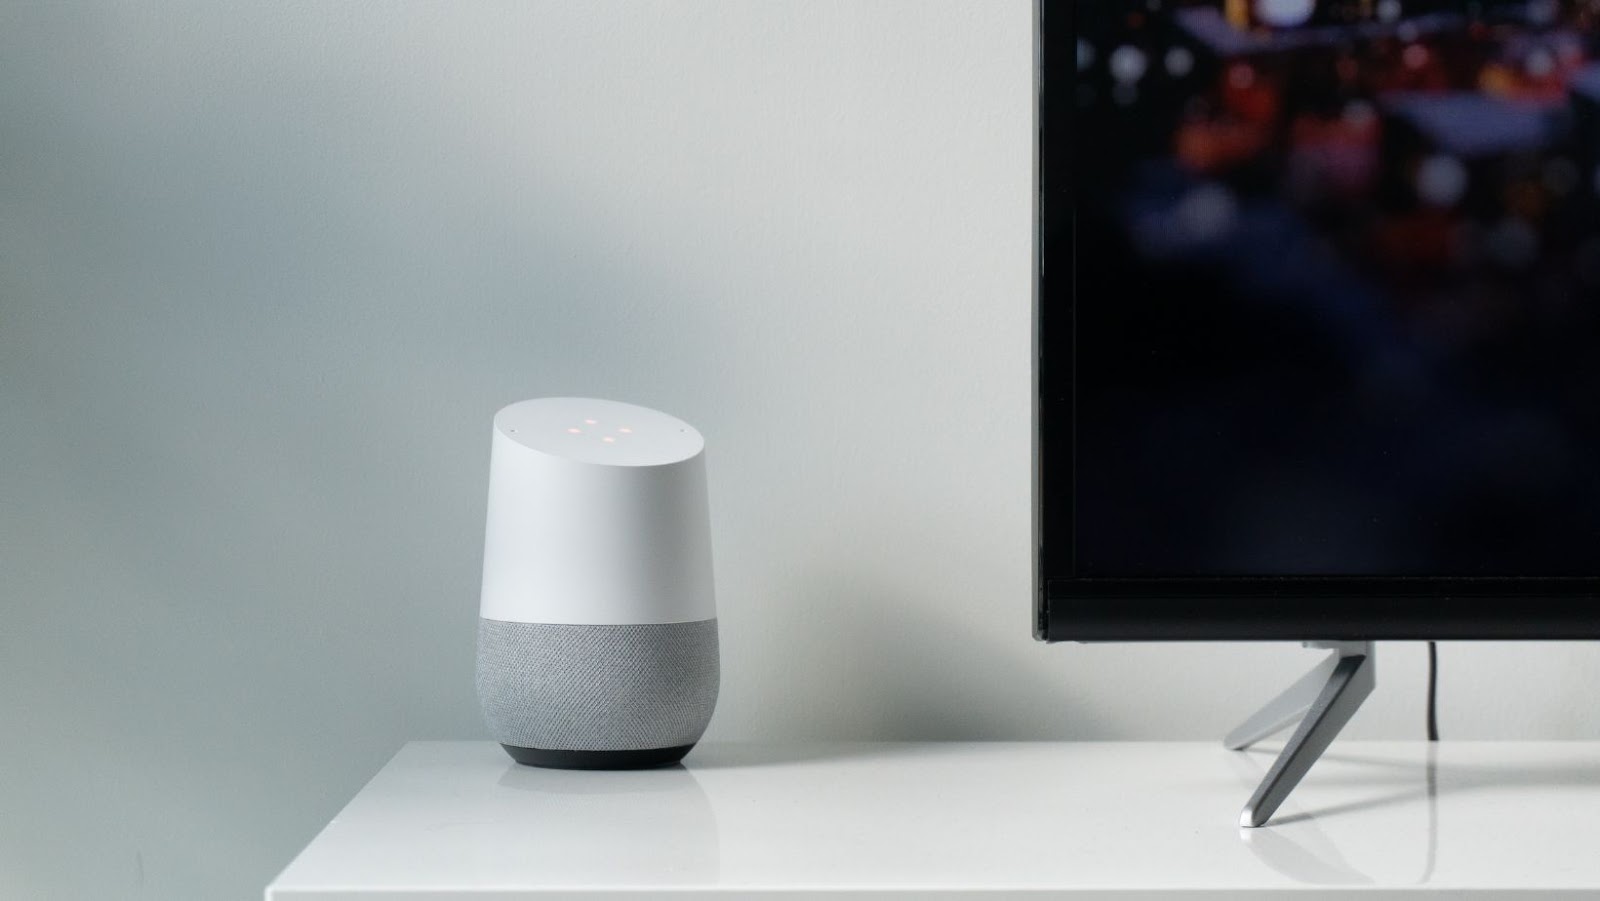 Step-by-Step Guide to Changing Google Home WiFi